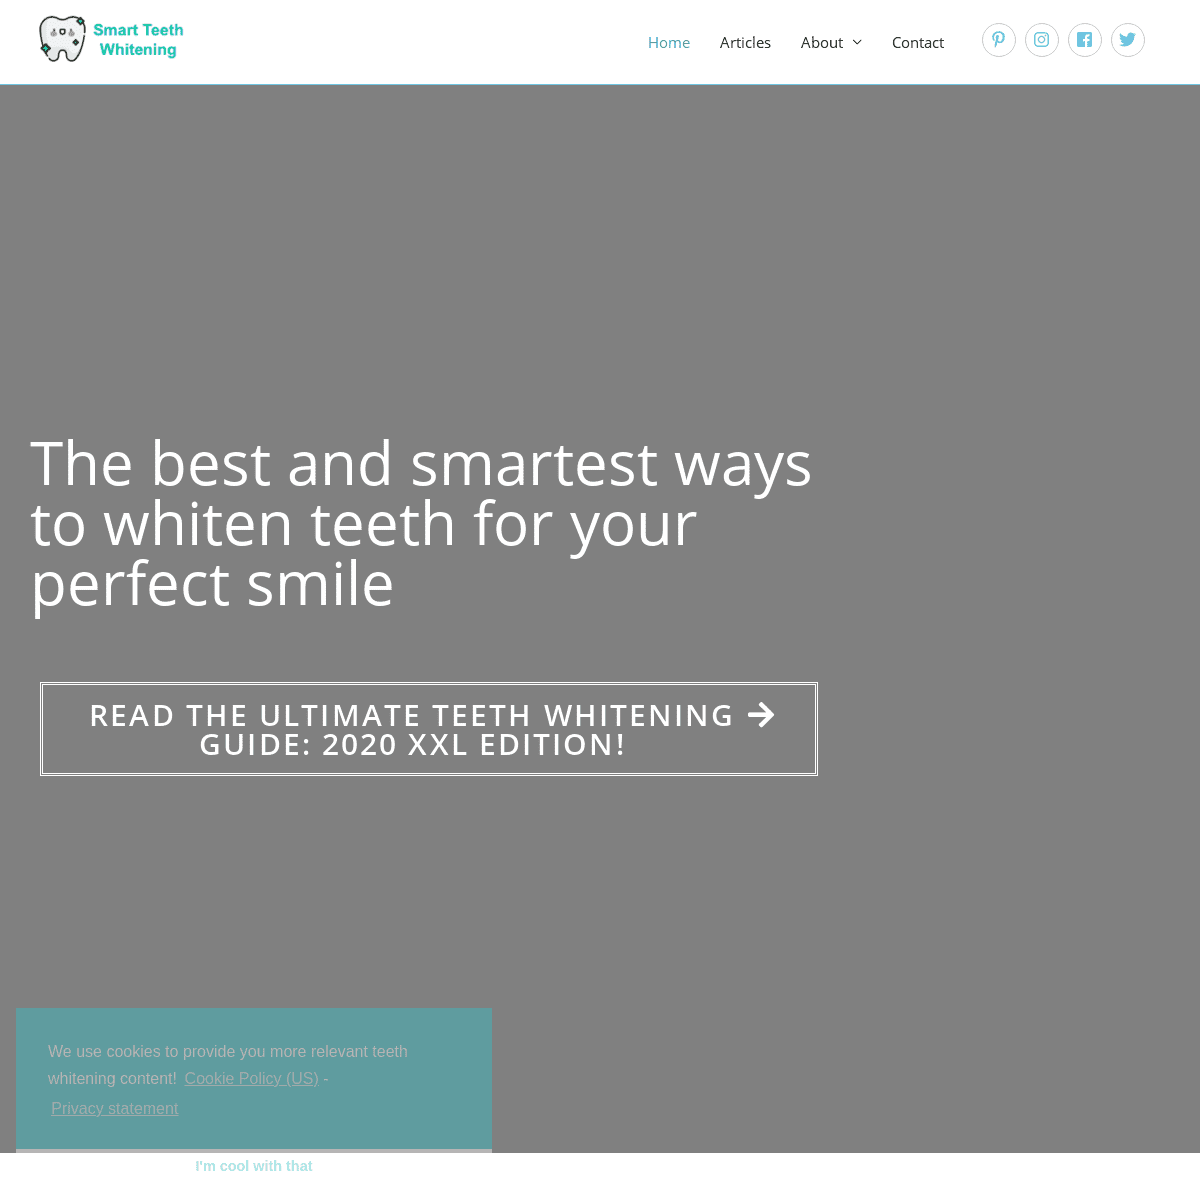 A complete backup of https://smartteethwhitening.com